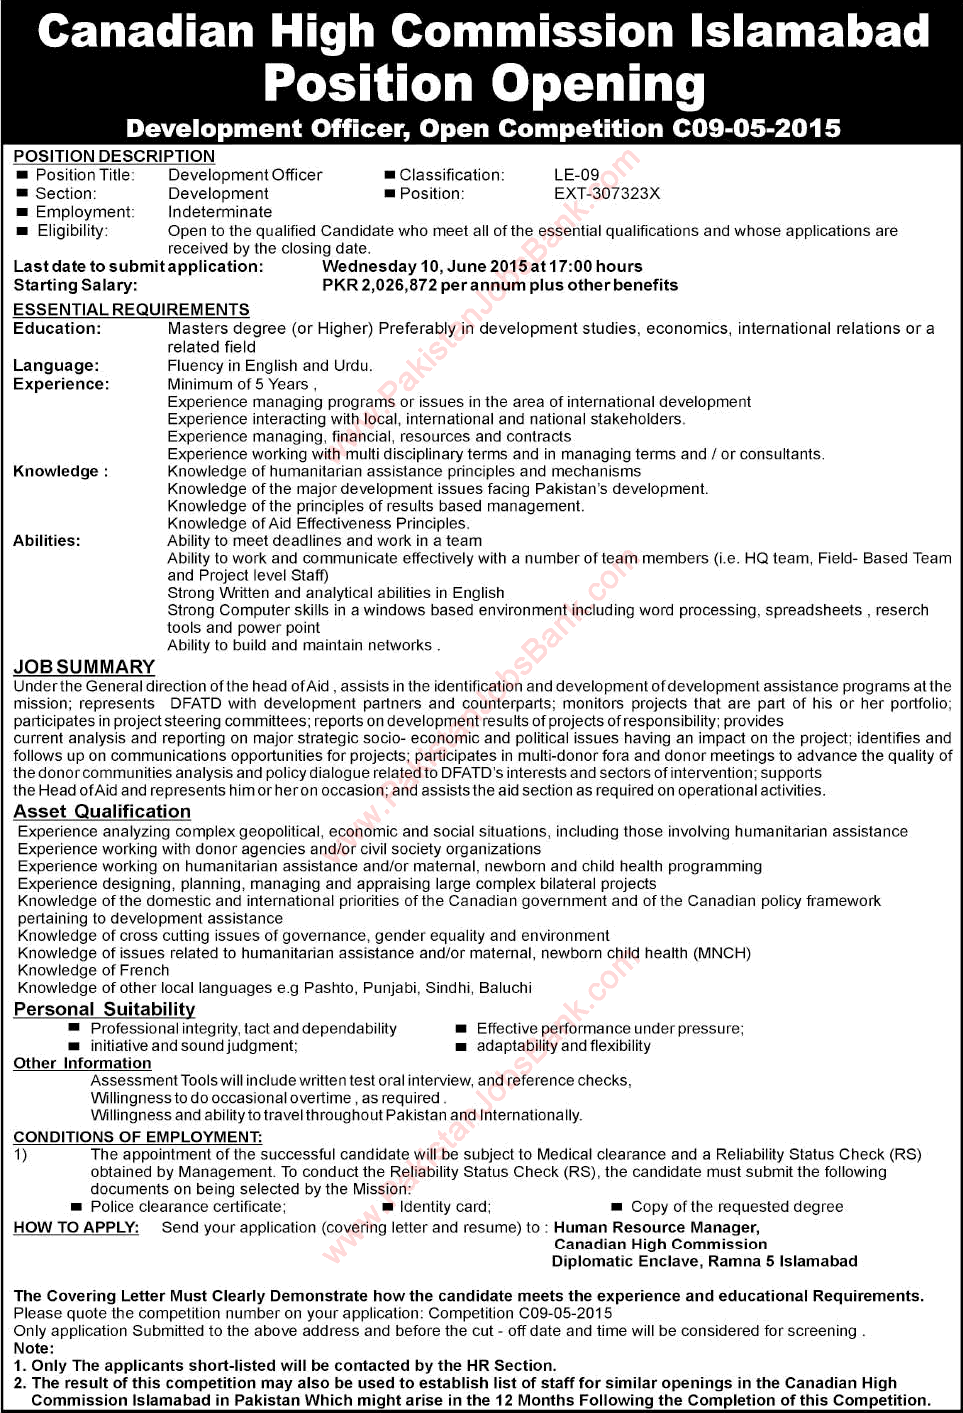 Canadian High Commission Islamabad Careers 2015 June Development Officer Latest